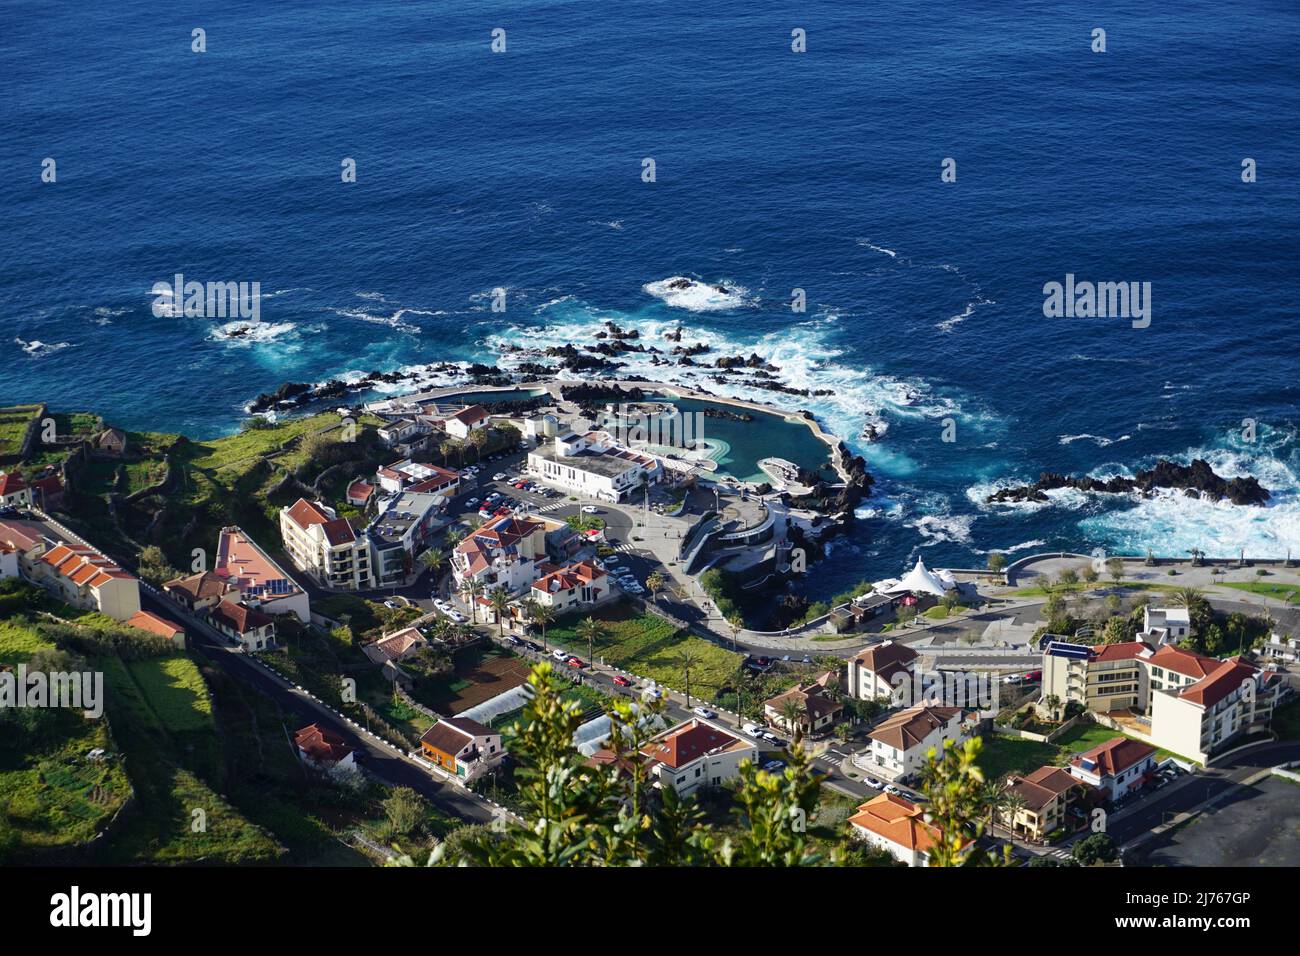 Aerial view of Porto Moniz. North on Madeira and the natural swimming pools created by lava lakes and the Atlantic Ocean, Portugal. Photo Matheisl Stock Photo